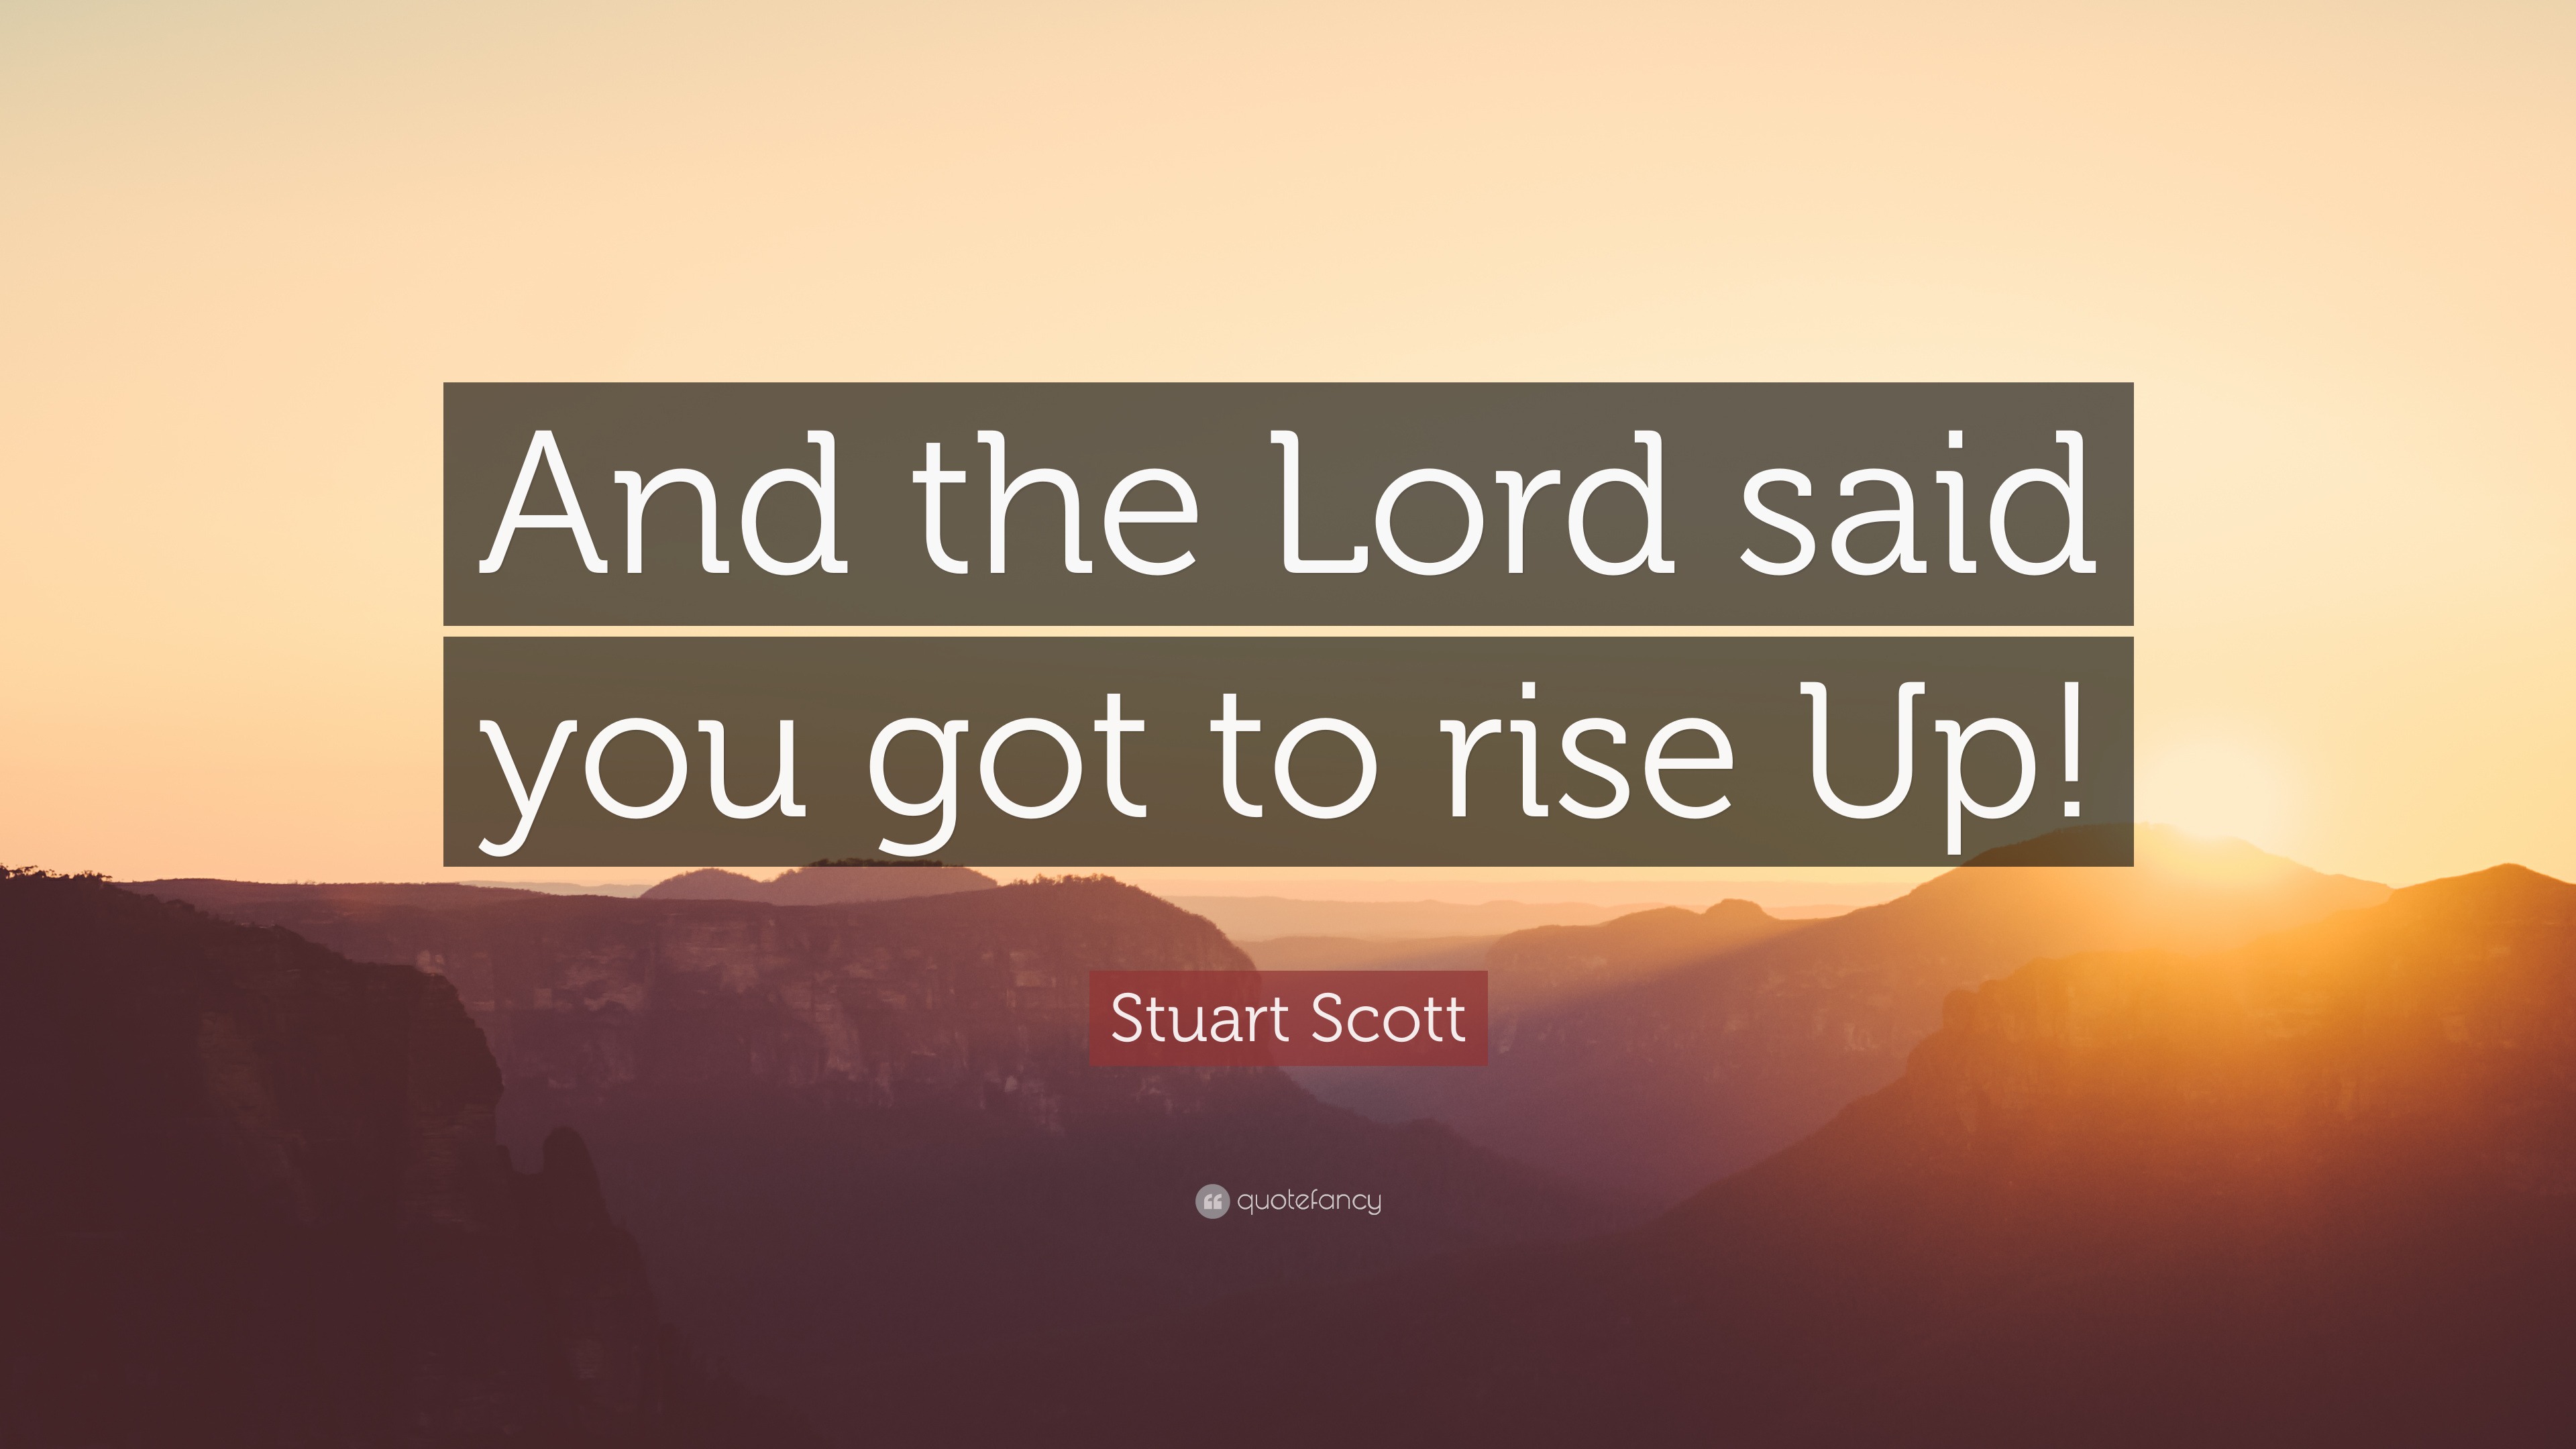 Stuart Scott Quote: “And the Lord said you got to rise Up!” (7 wallpapers)  - Quotefancy